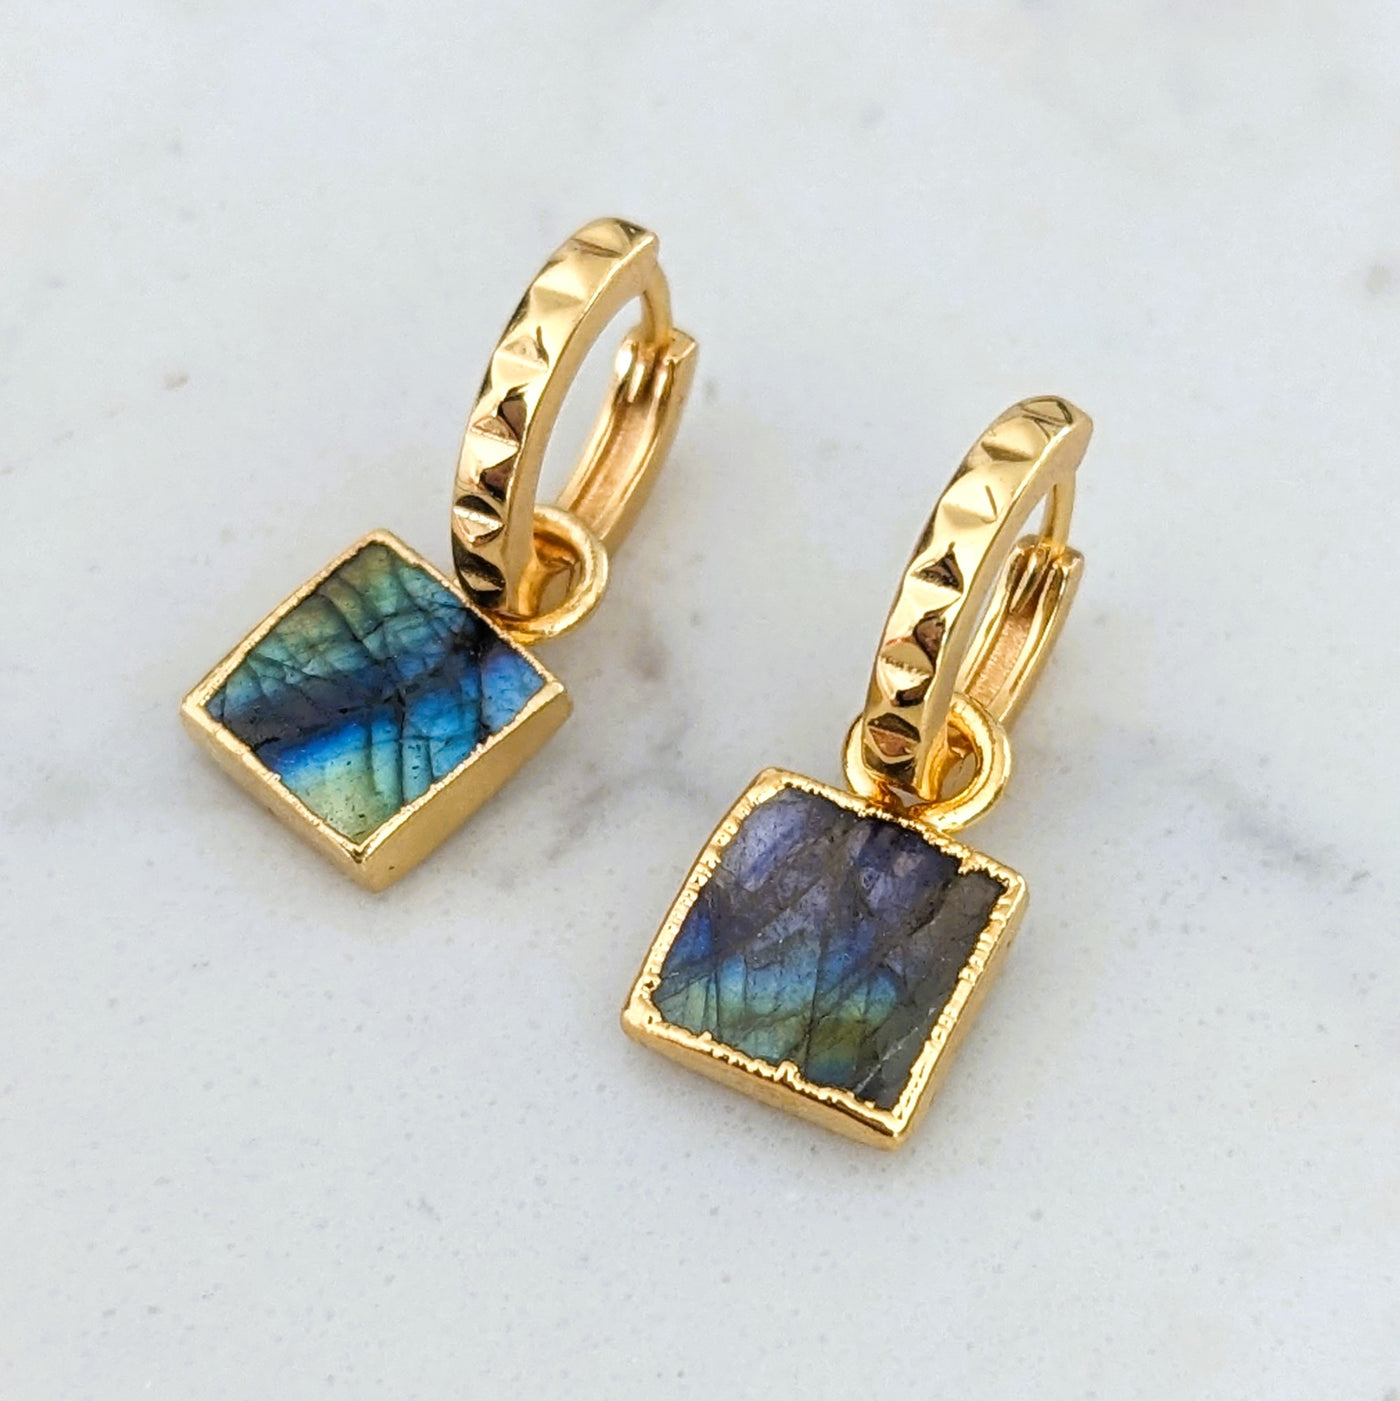 The Square Labradorite Gemstone Hoop Earrings - 18ct Gold Plated